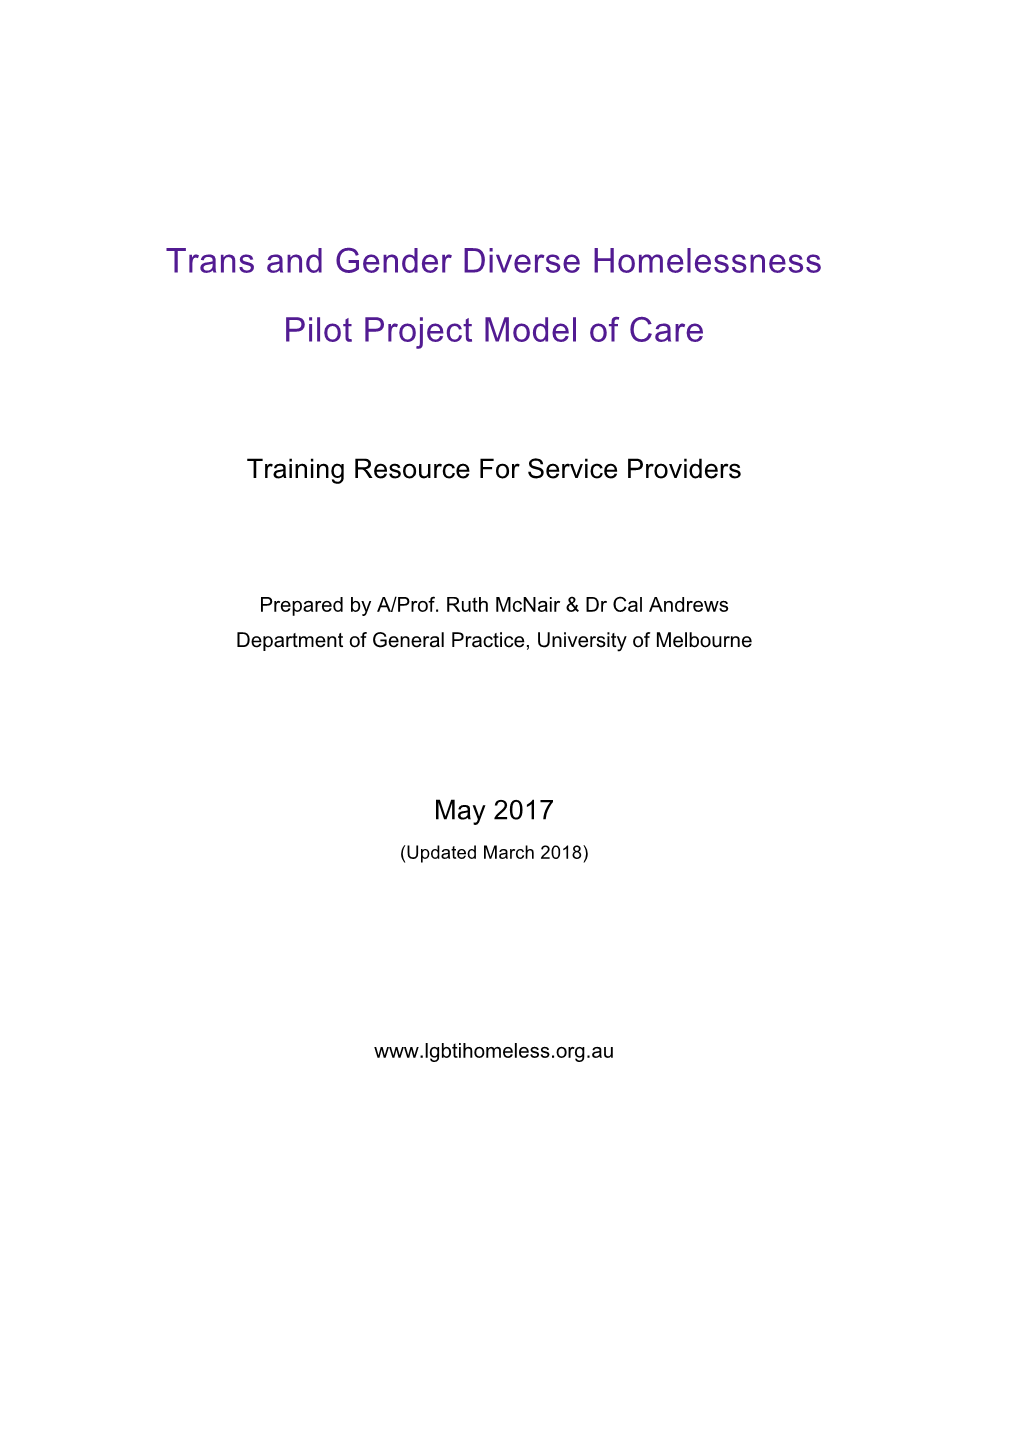 Trans and Gender Diverse Homelessness Pilot Model of Care